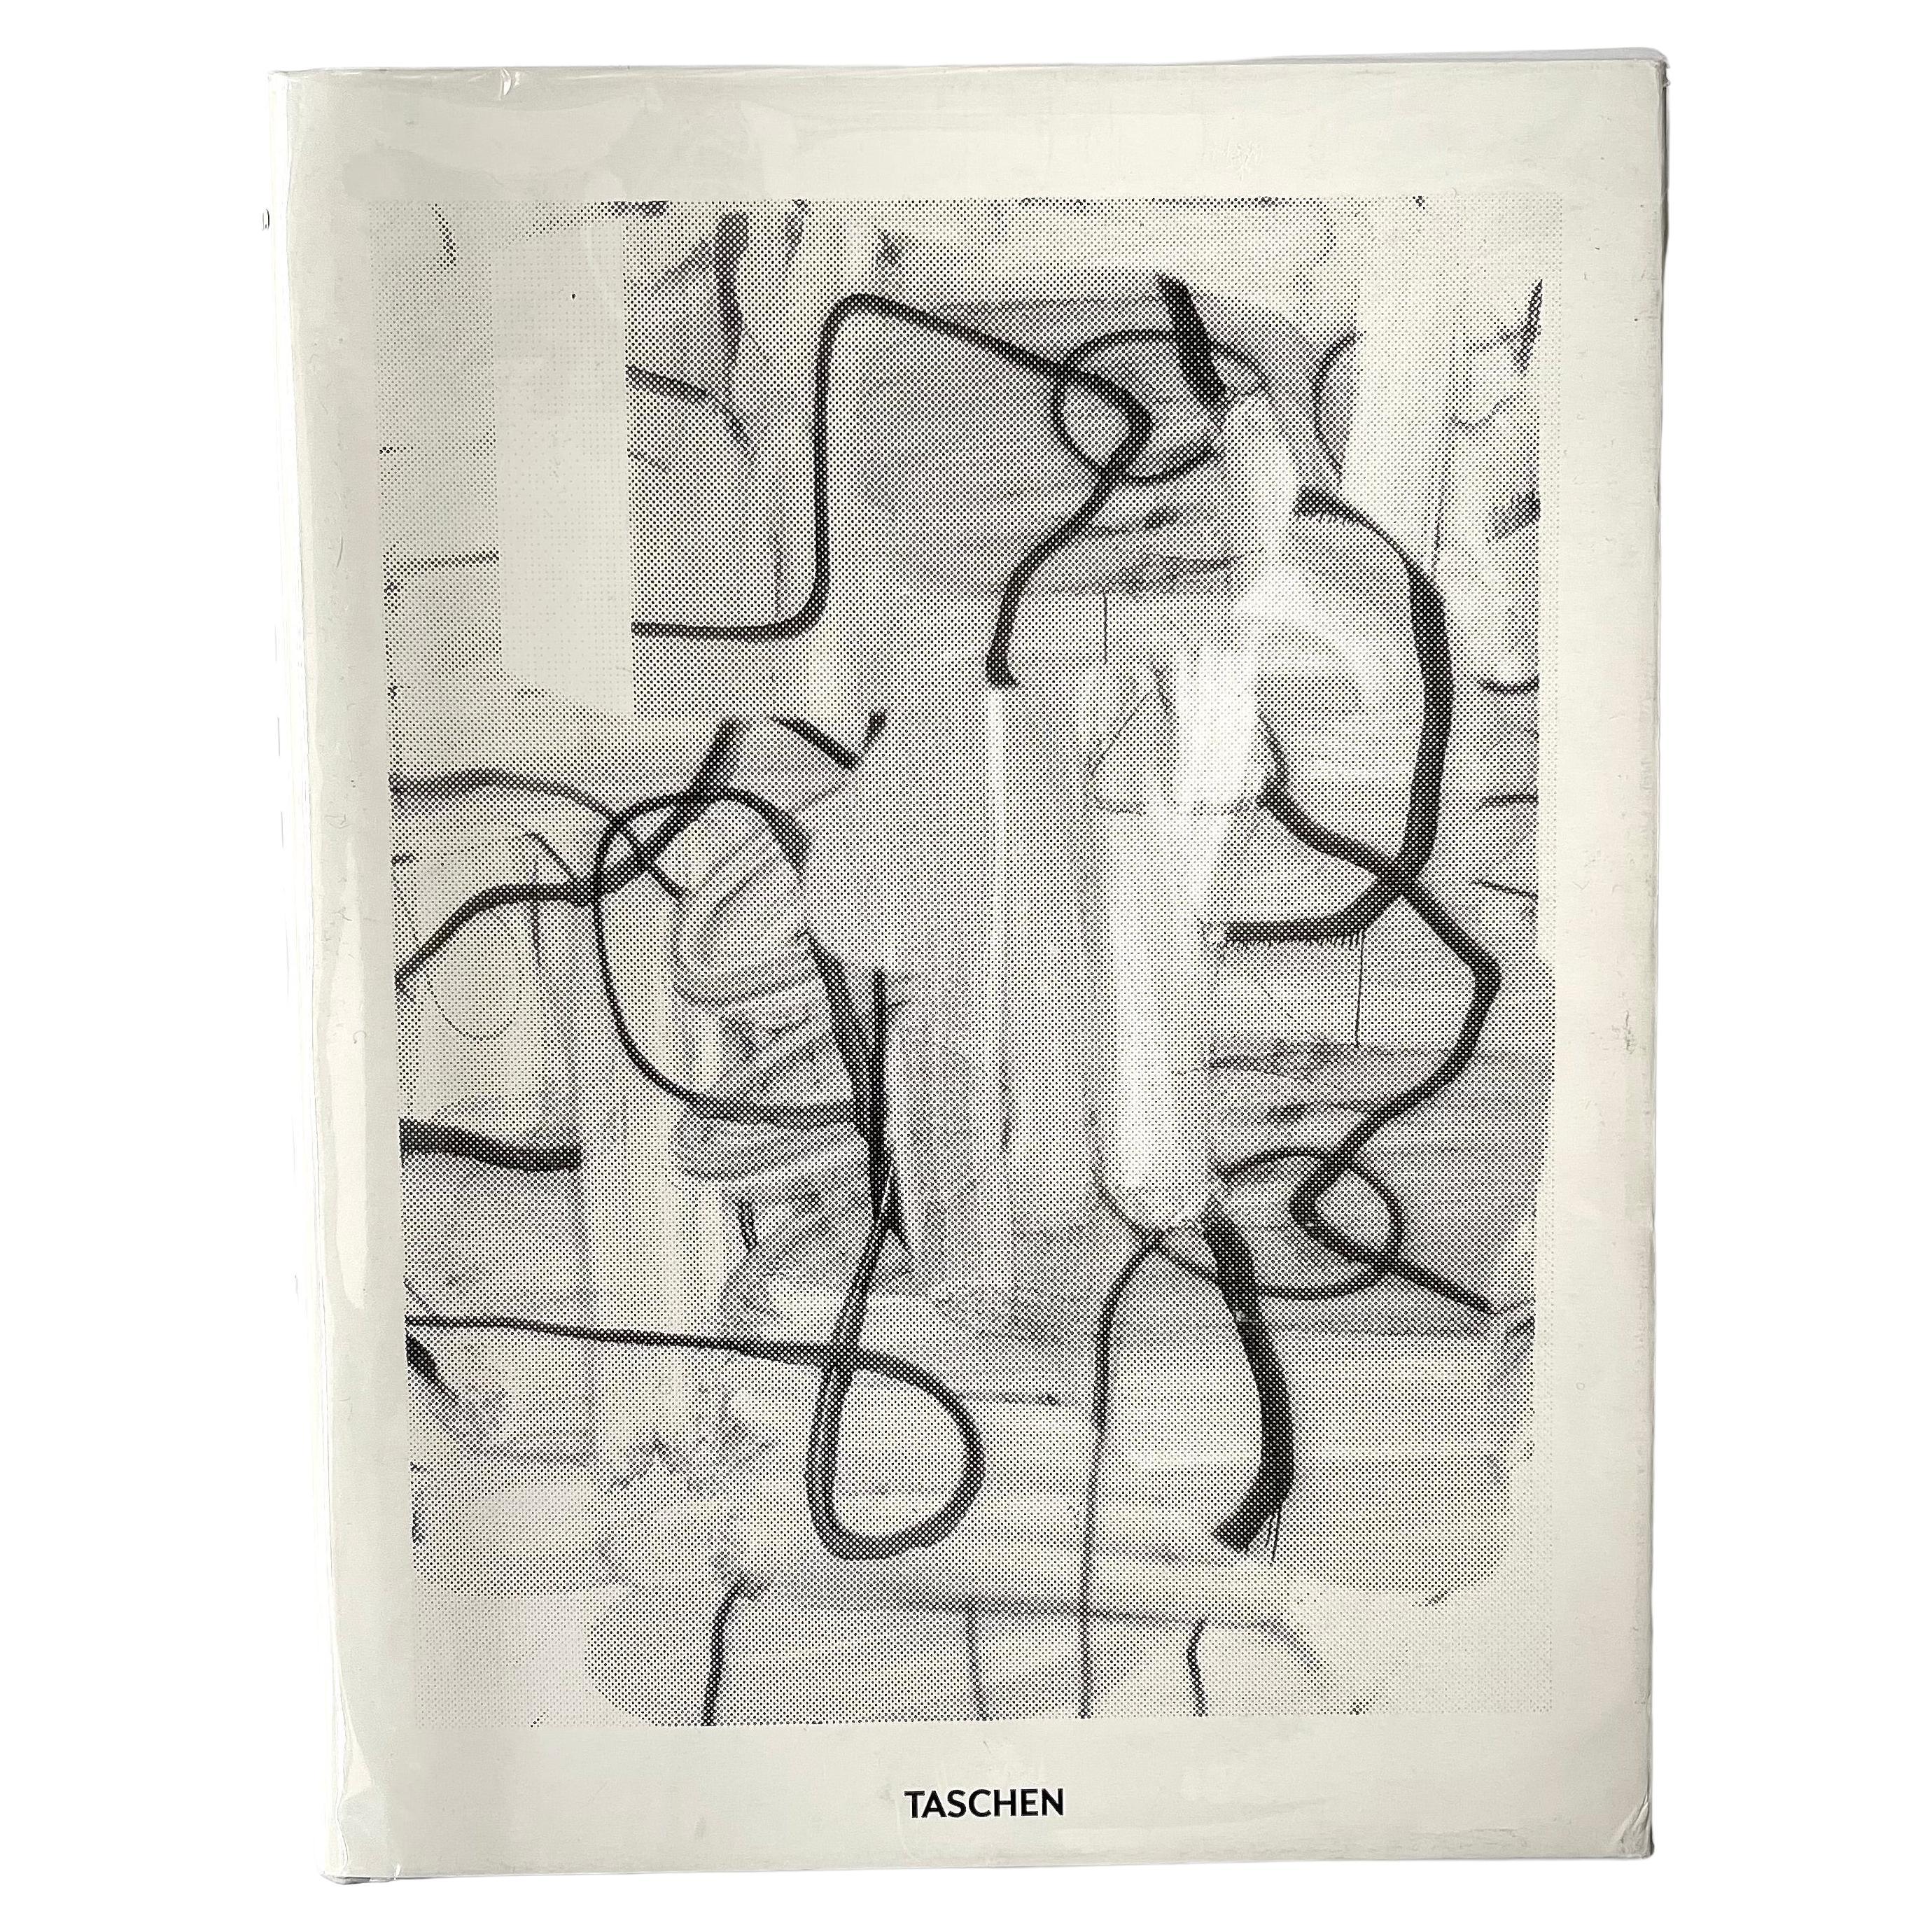 1st Edition 2012 Published by Taschen Text in English, French and German.

Exploring Christopher Wool's meanings and messages in a comprehensive monographIn-your-face, achingly simple, deceptively frank. The work of Christopher Wool is so very New